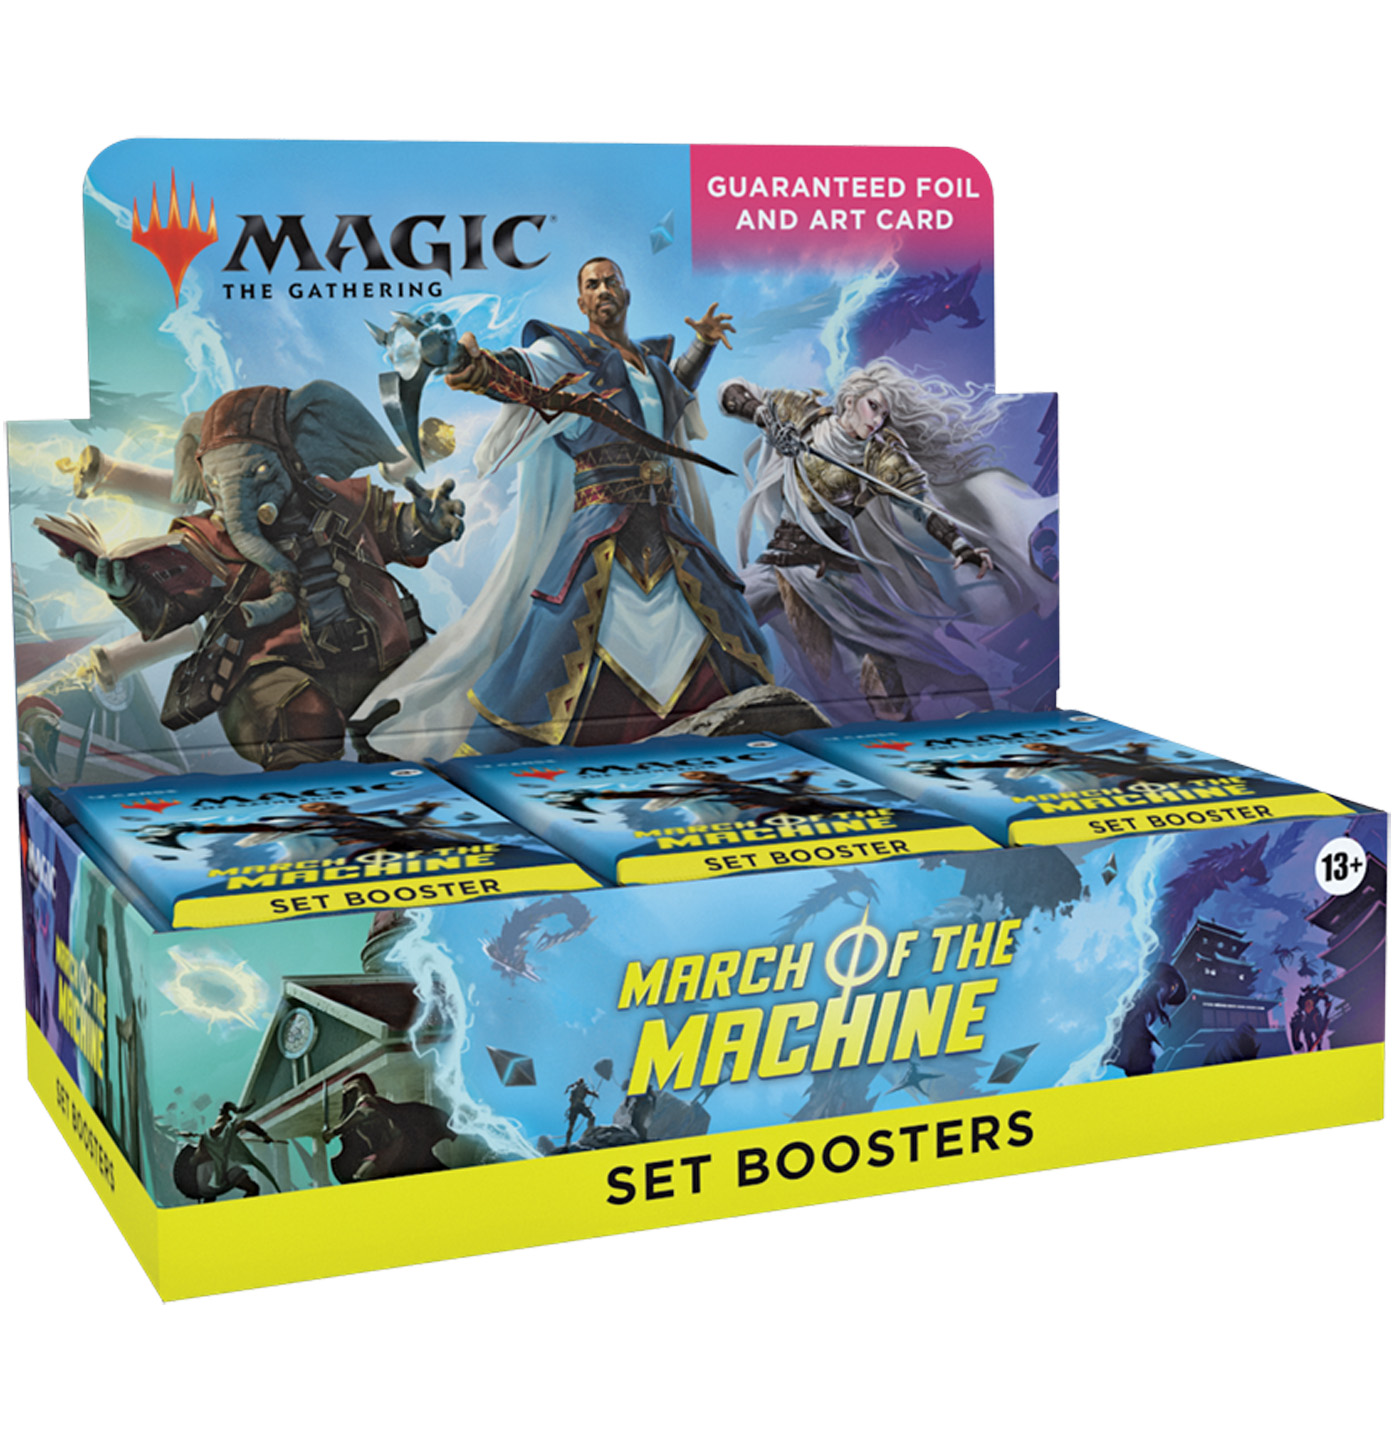 March of the Machine Set Booster Box - Magic the Gathering - EN